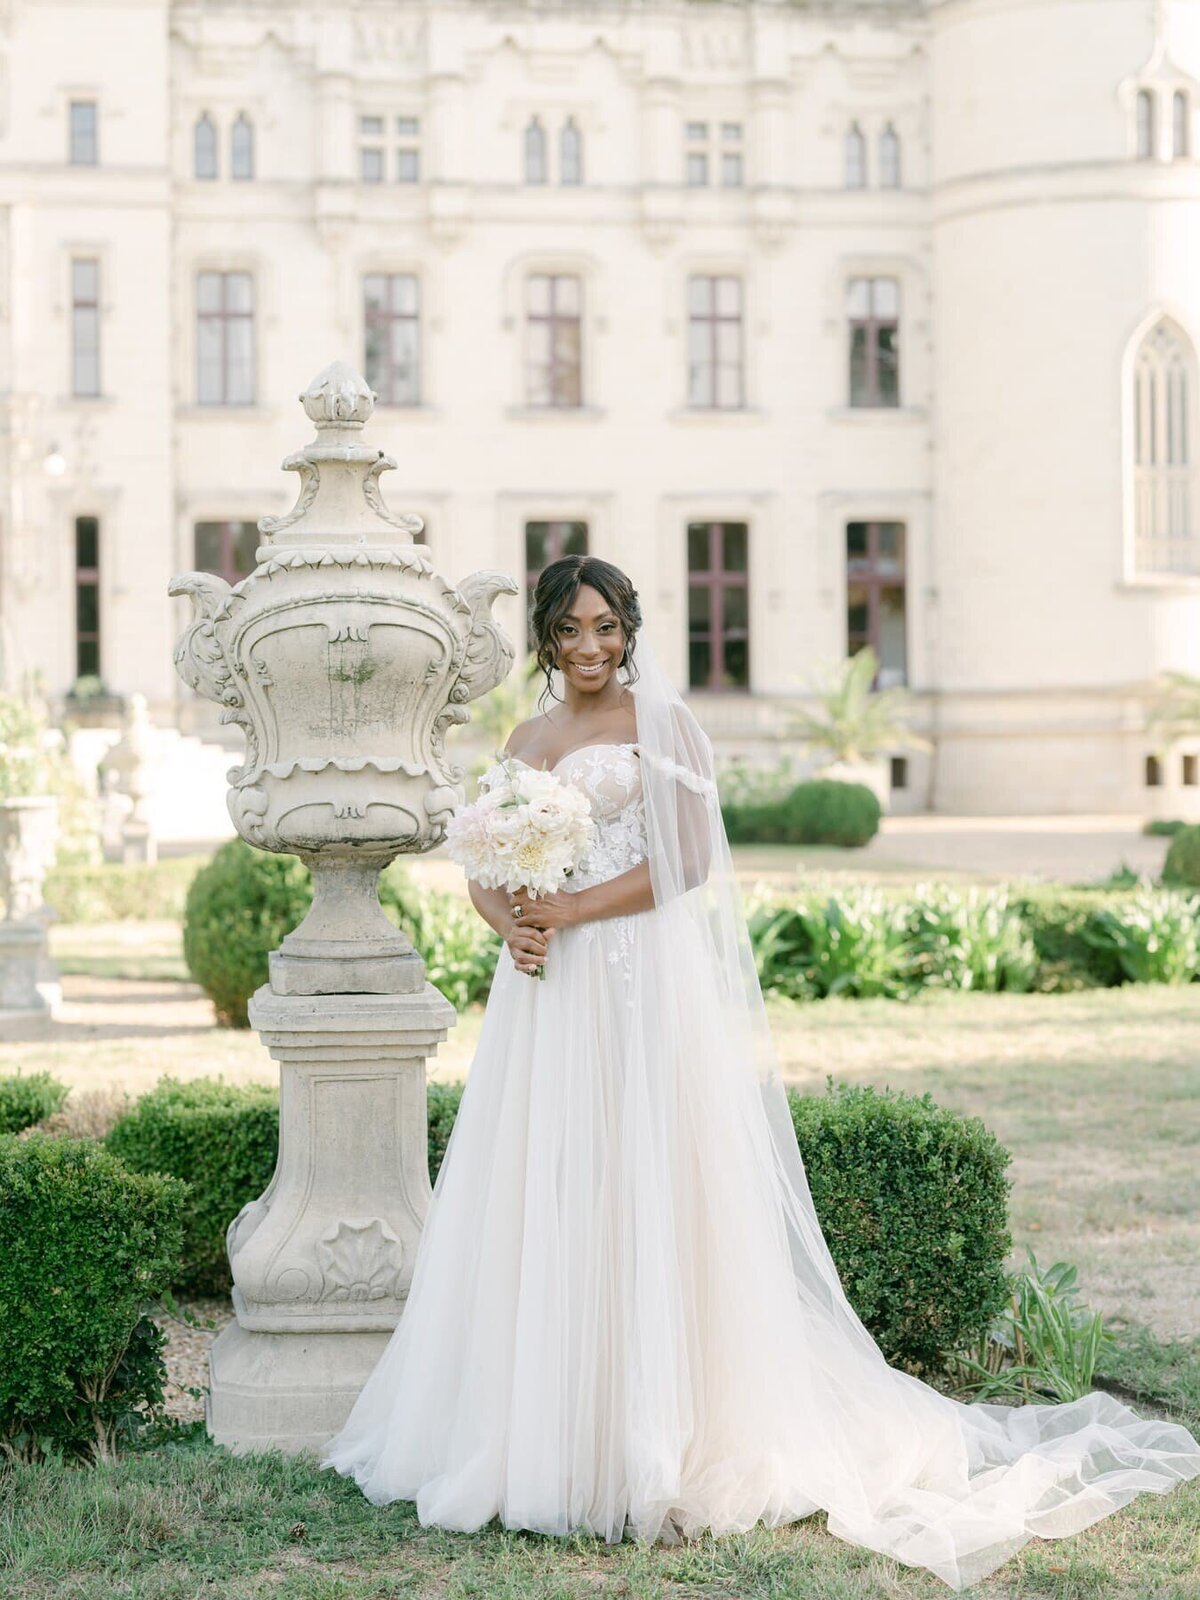 Serenity Photography - Wedding in France chateau 105